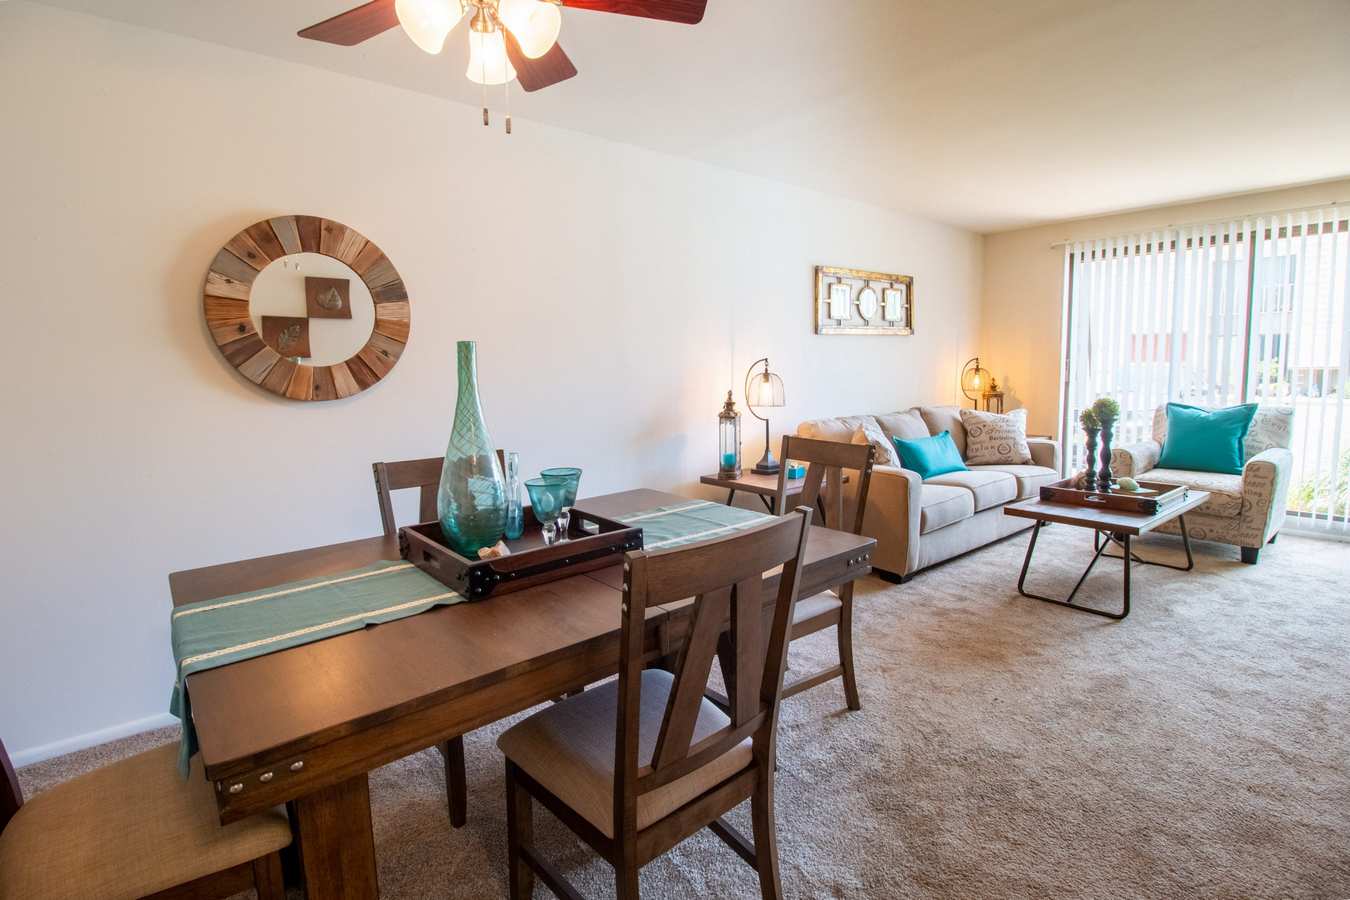 Model living room at Mill Village in Millville, New Jersey